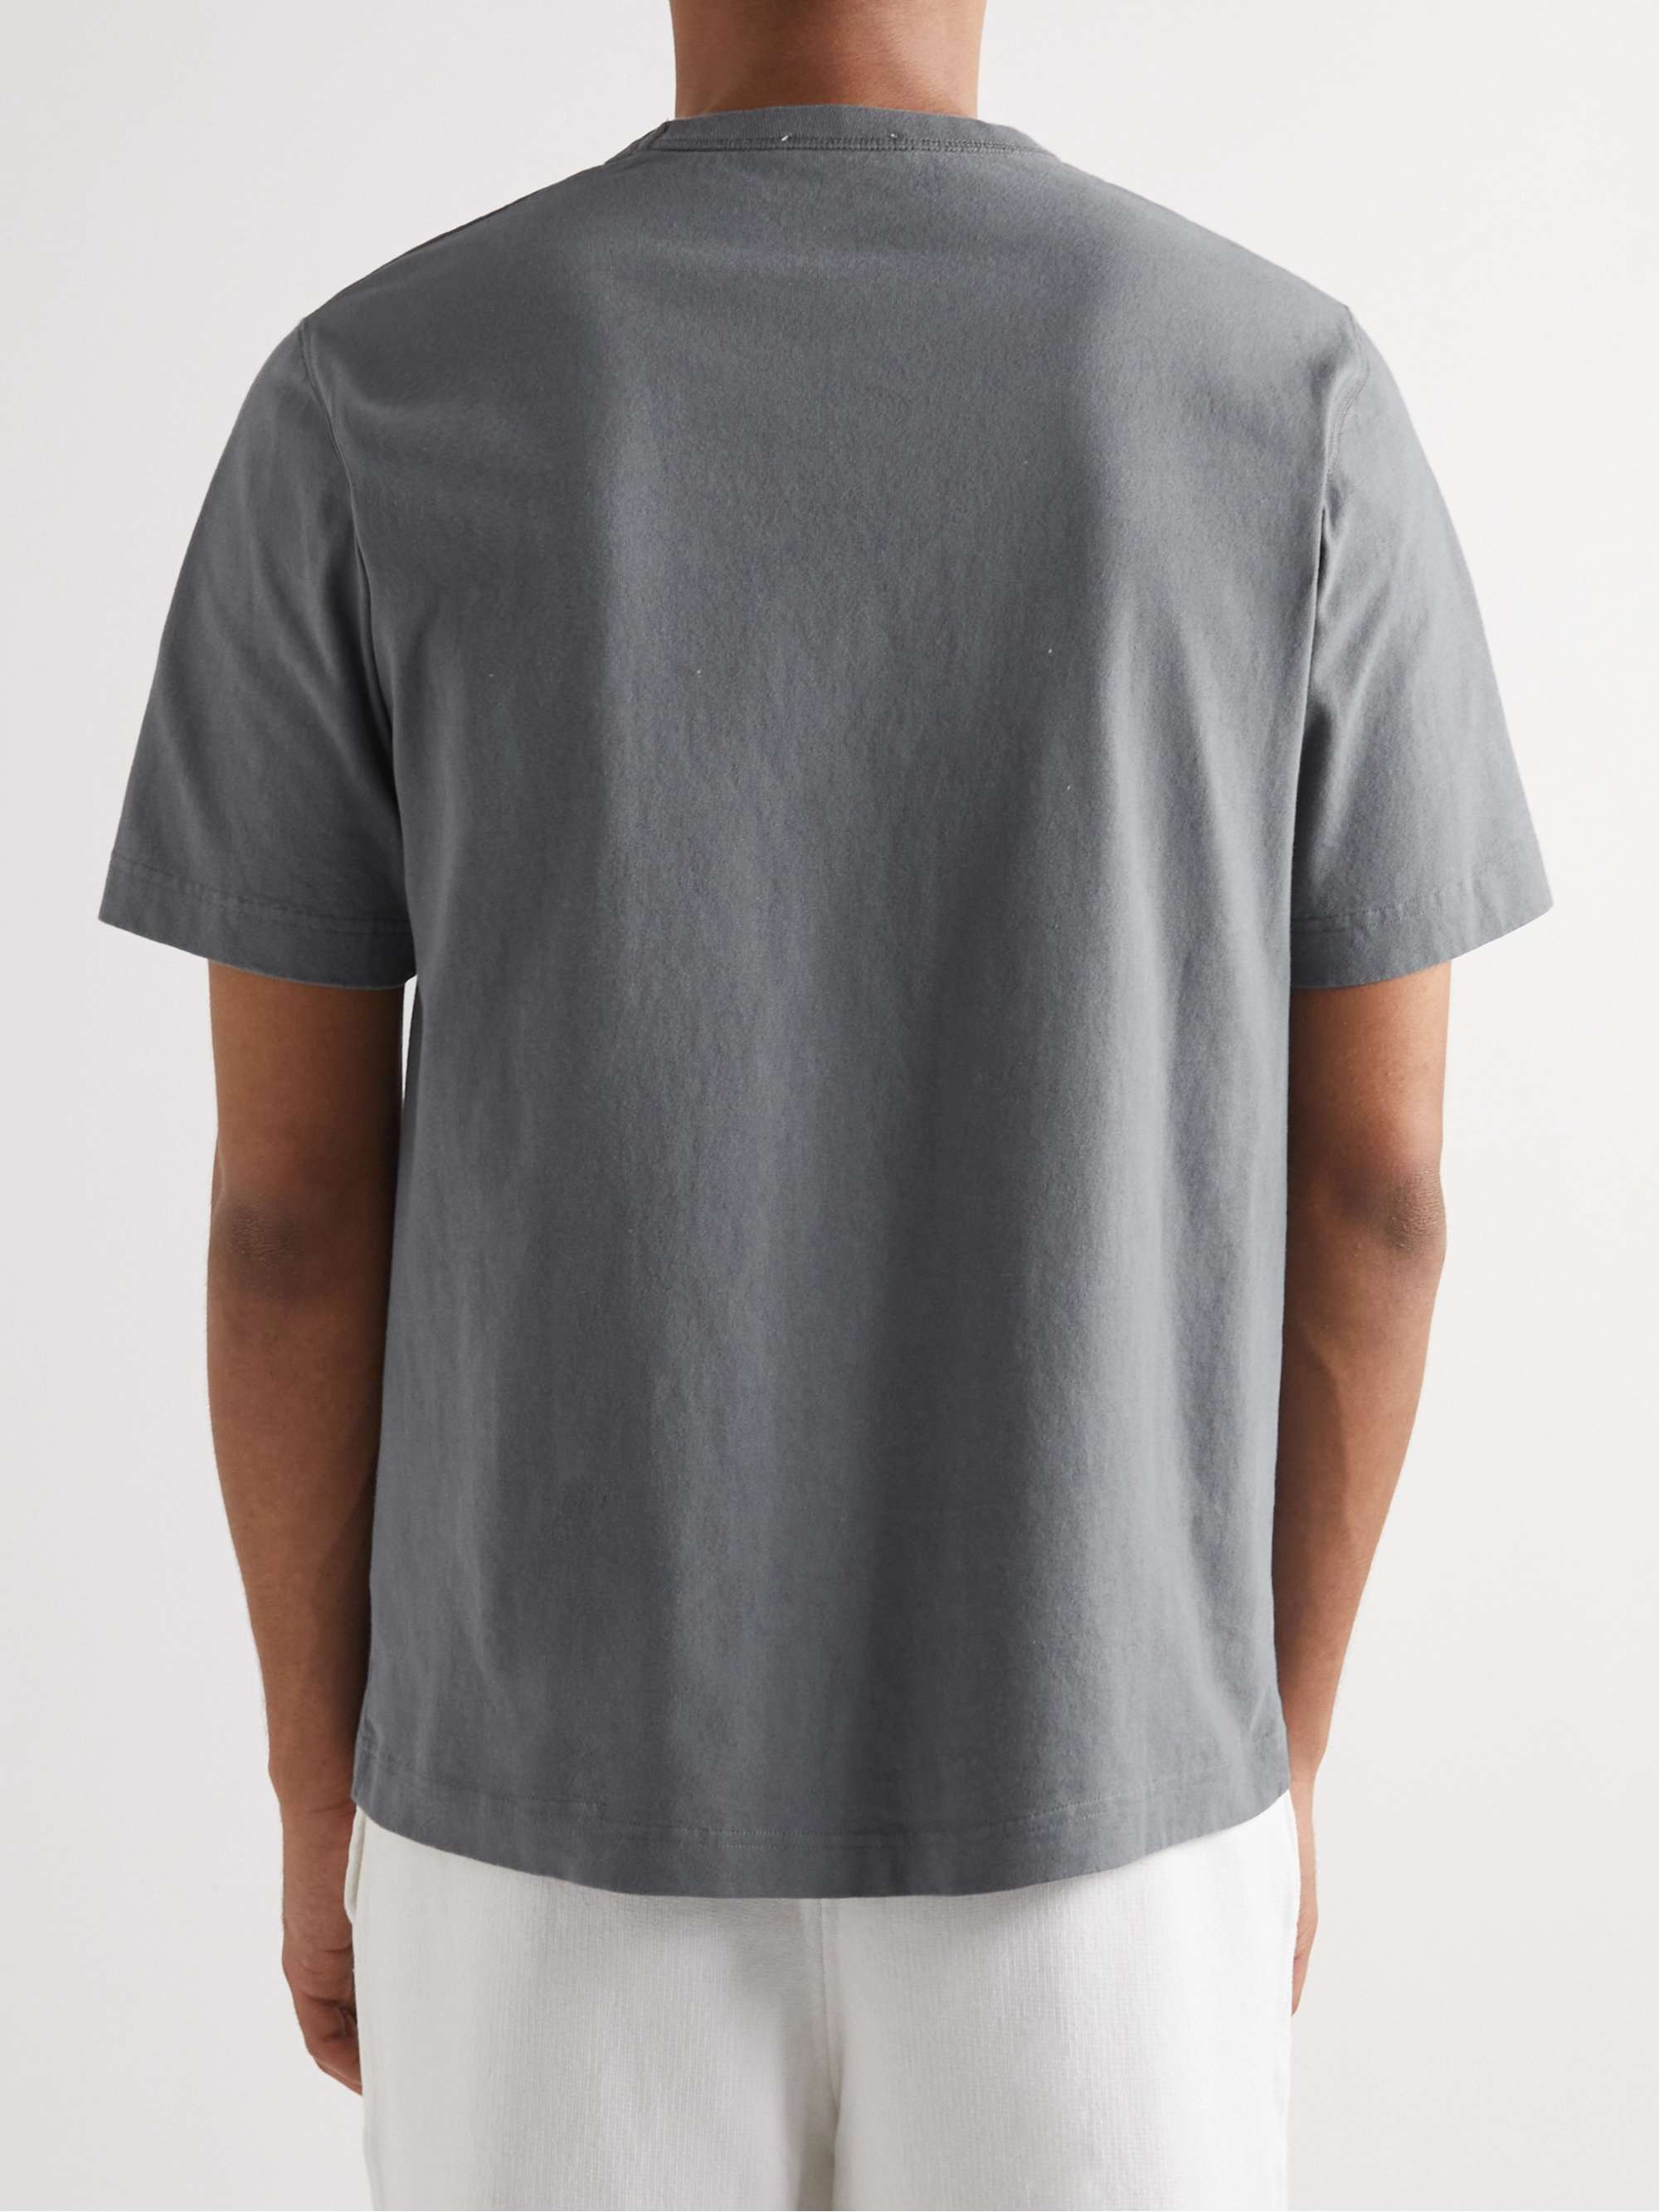 NORSE PROJECTS Holger Organic Cotton-Jersey T-Shirt for Men | MR PORTER